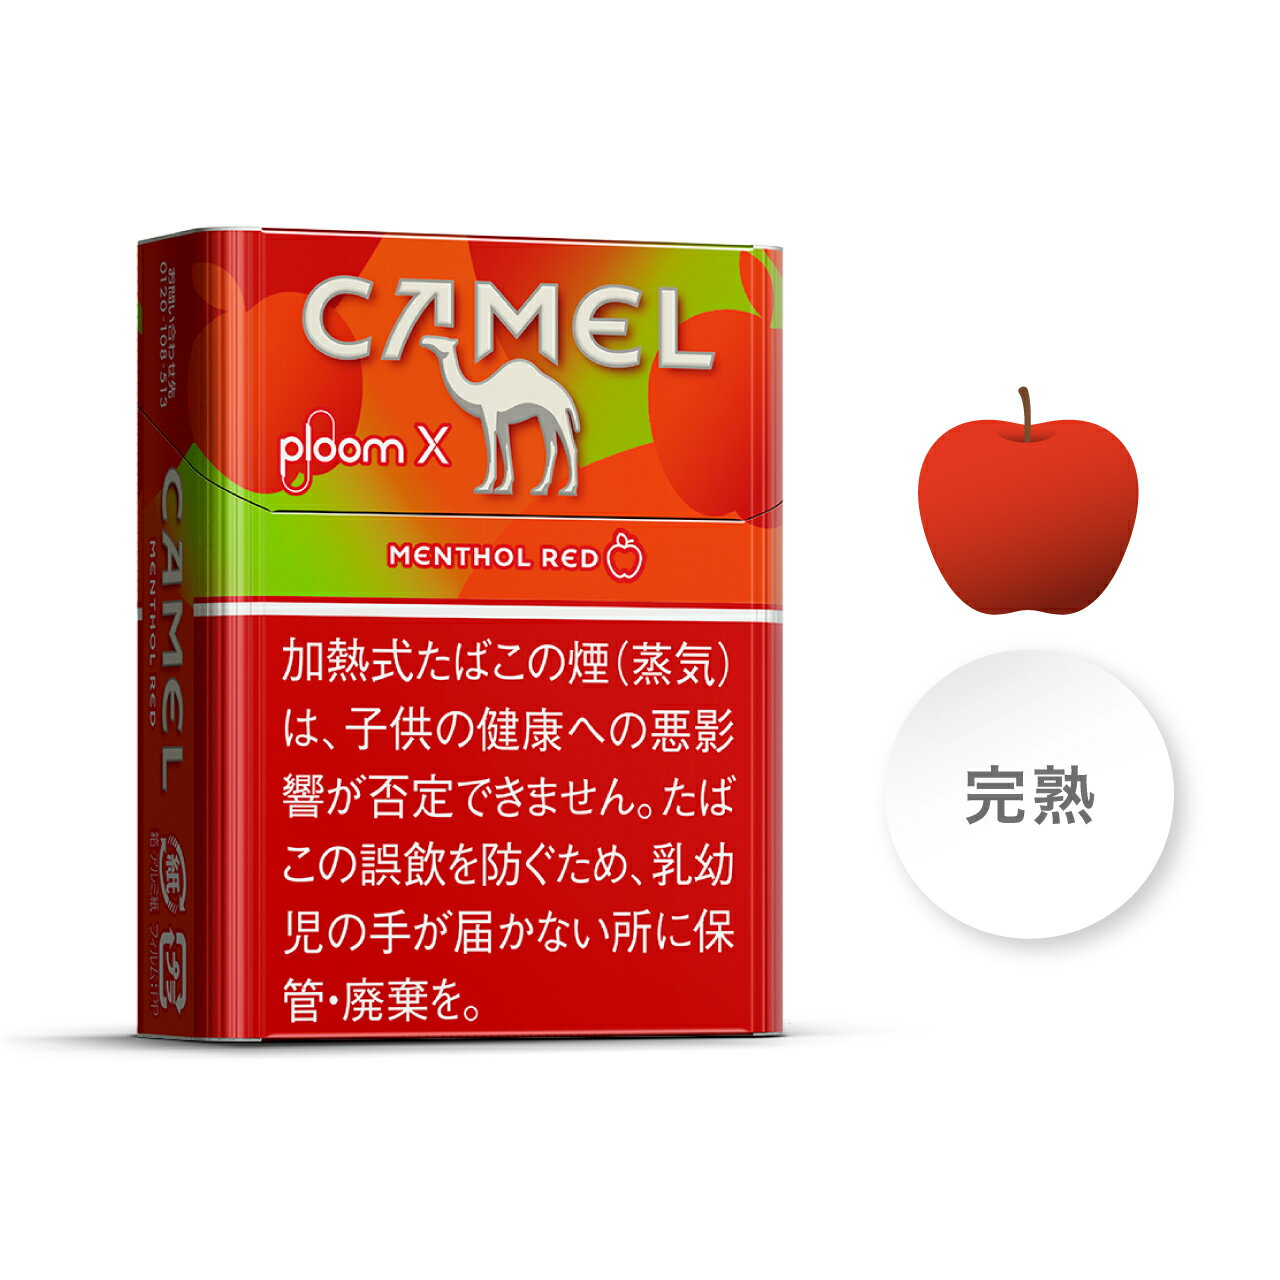 international delivery available 200Sticks Camel Menthol Red Ploom X